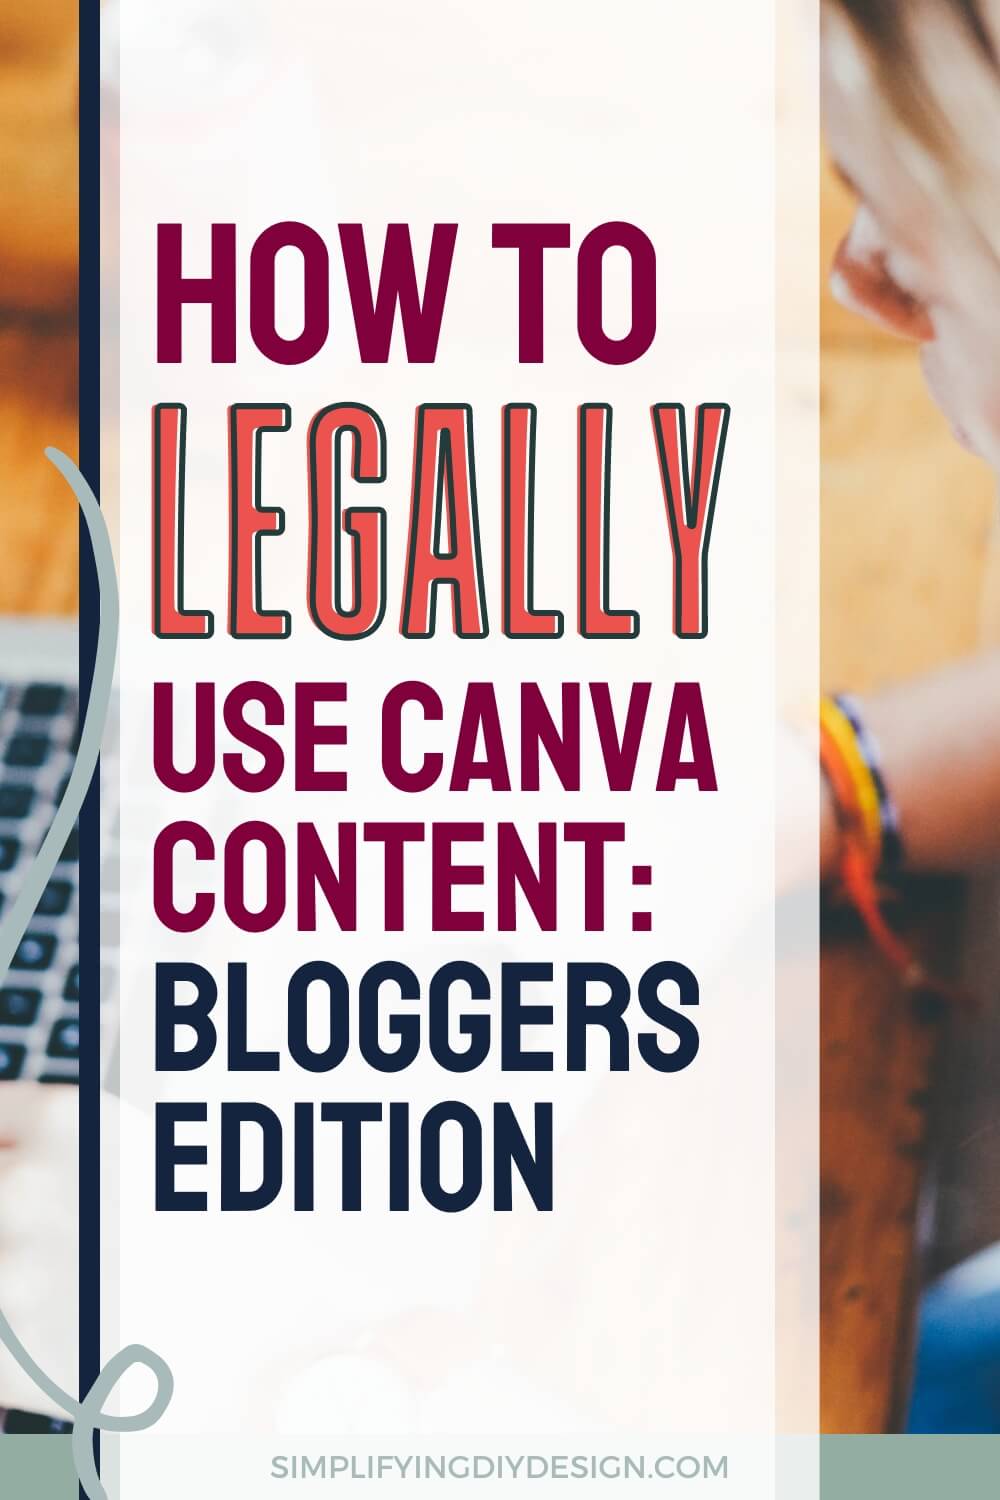 If you use Canva content on your blog, especially stock images, chances are you could be violating Canva's Content License Agreement without even knowing it!